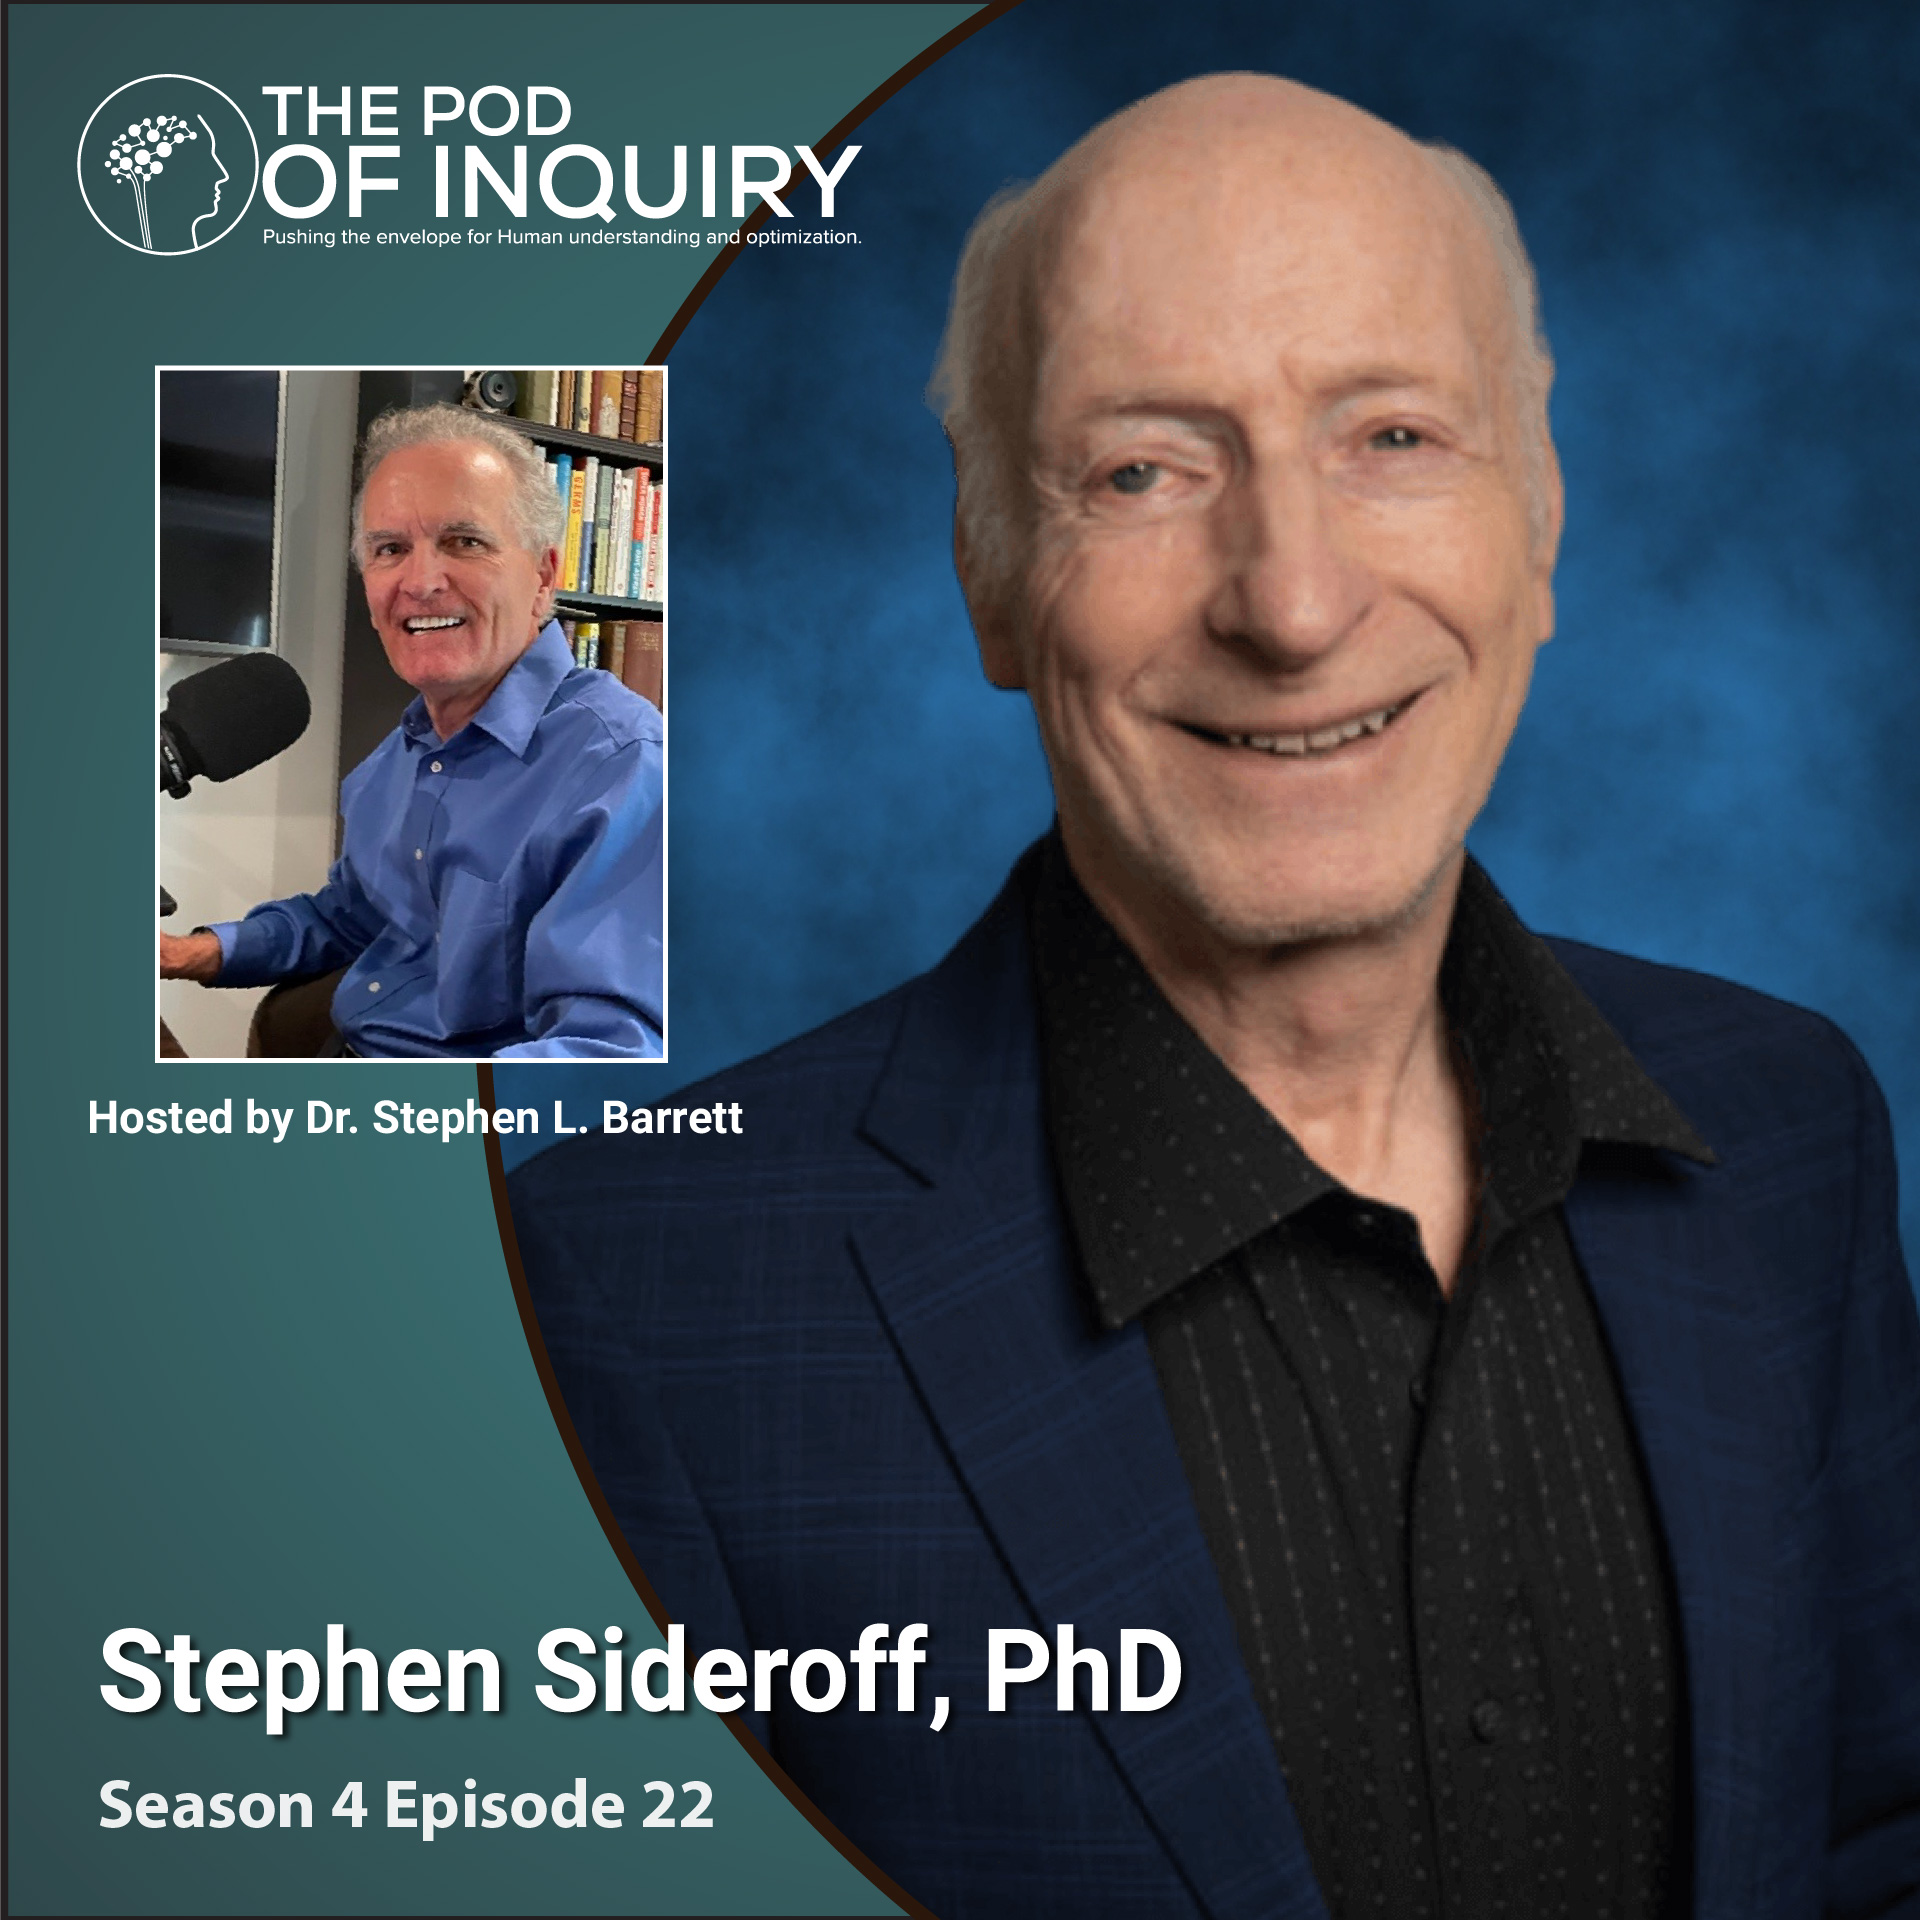 How to Master Stress Resilience: Dr. Stephen Sideroff on “The Nine Pillars of Resilience”